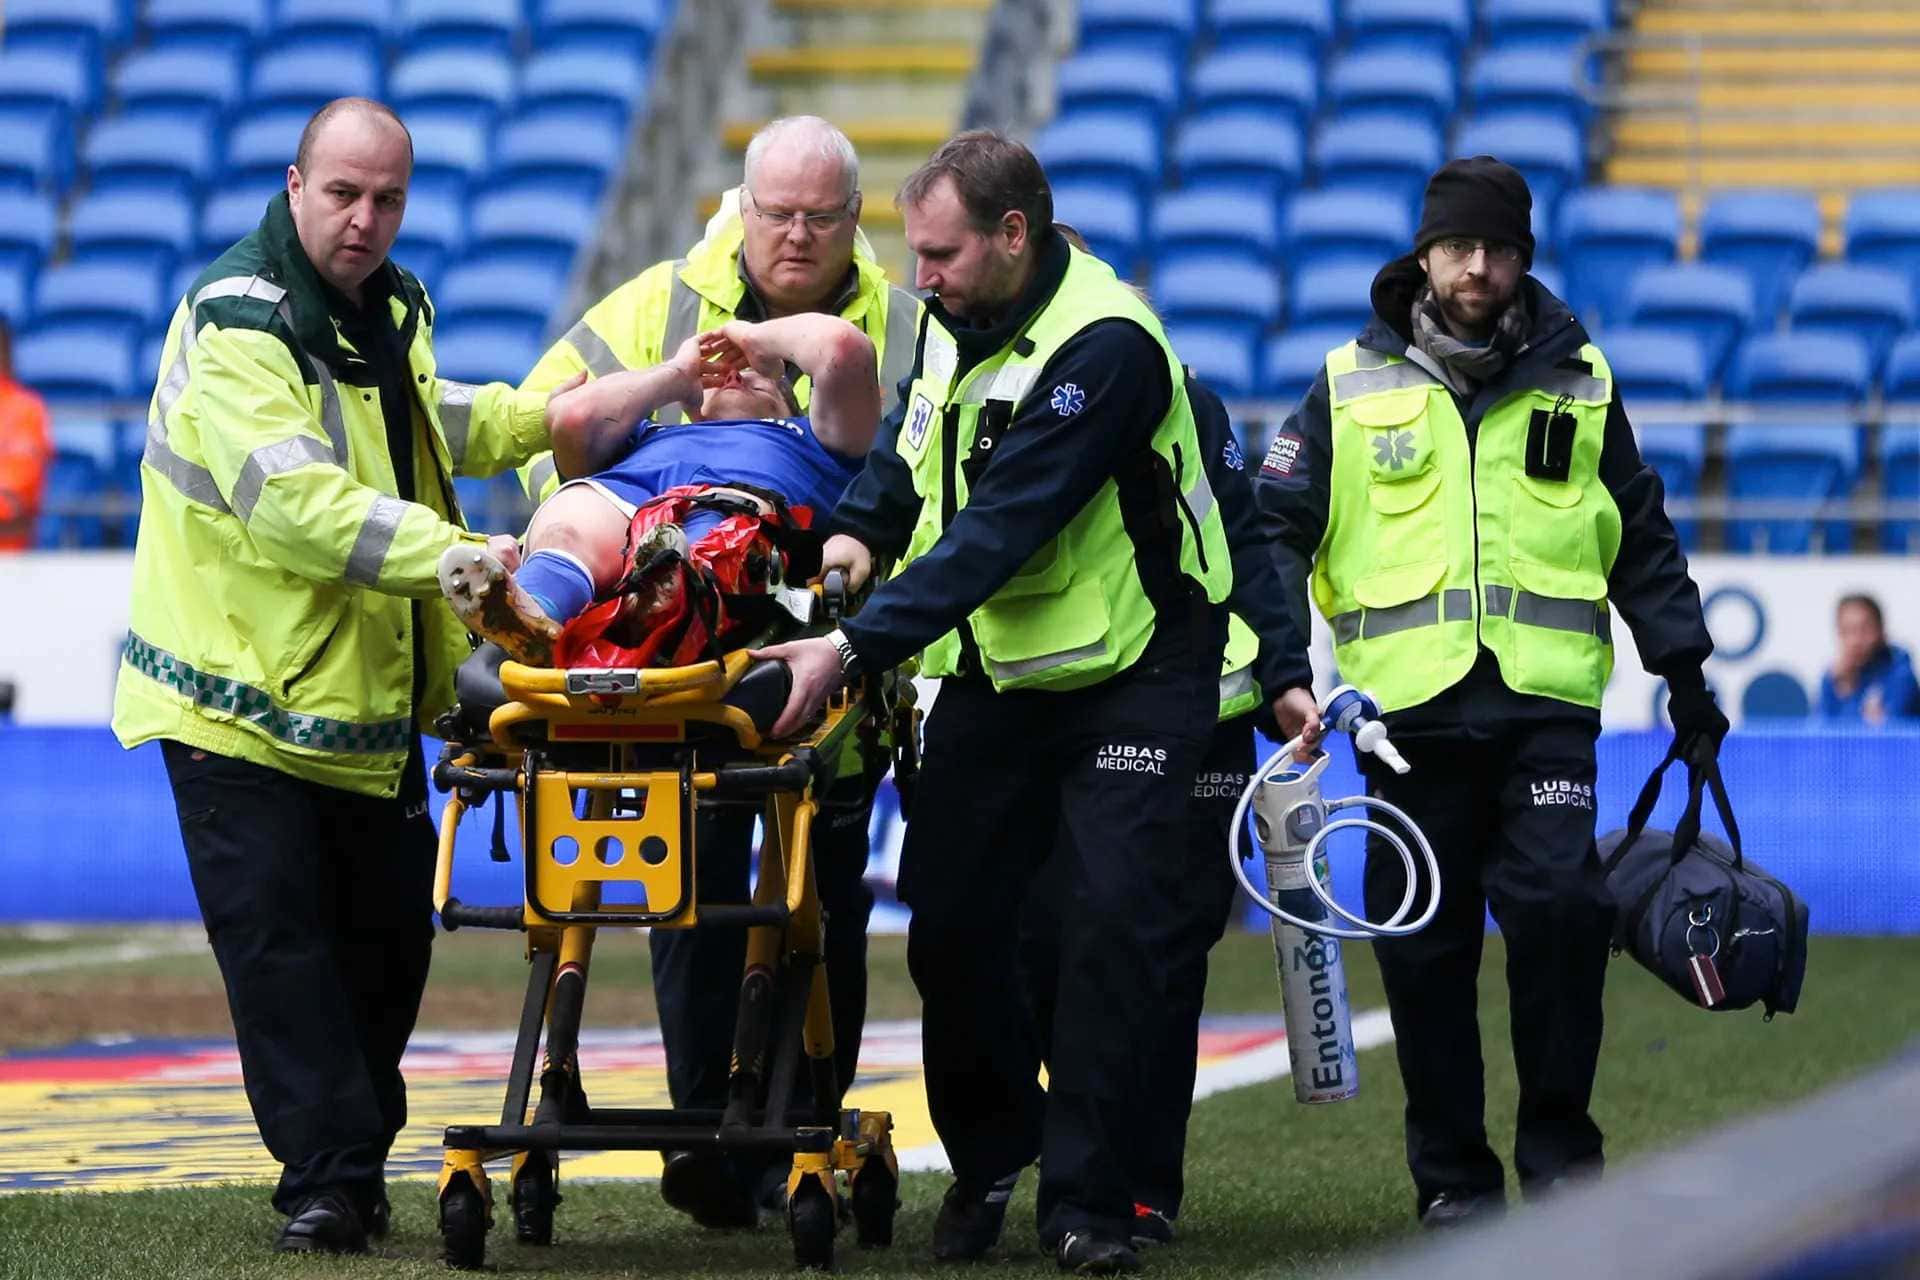 Lubas Medical team removing injured Cardiff City player with leg fracture